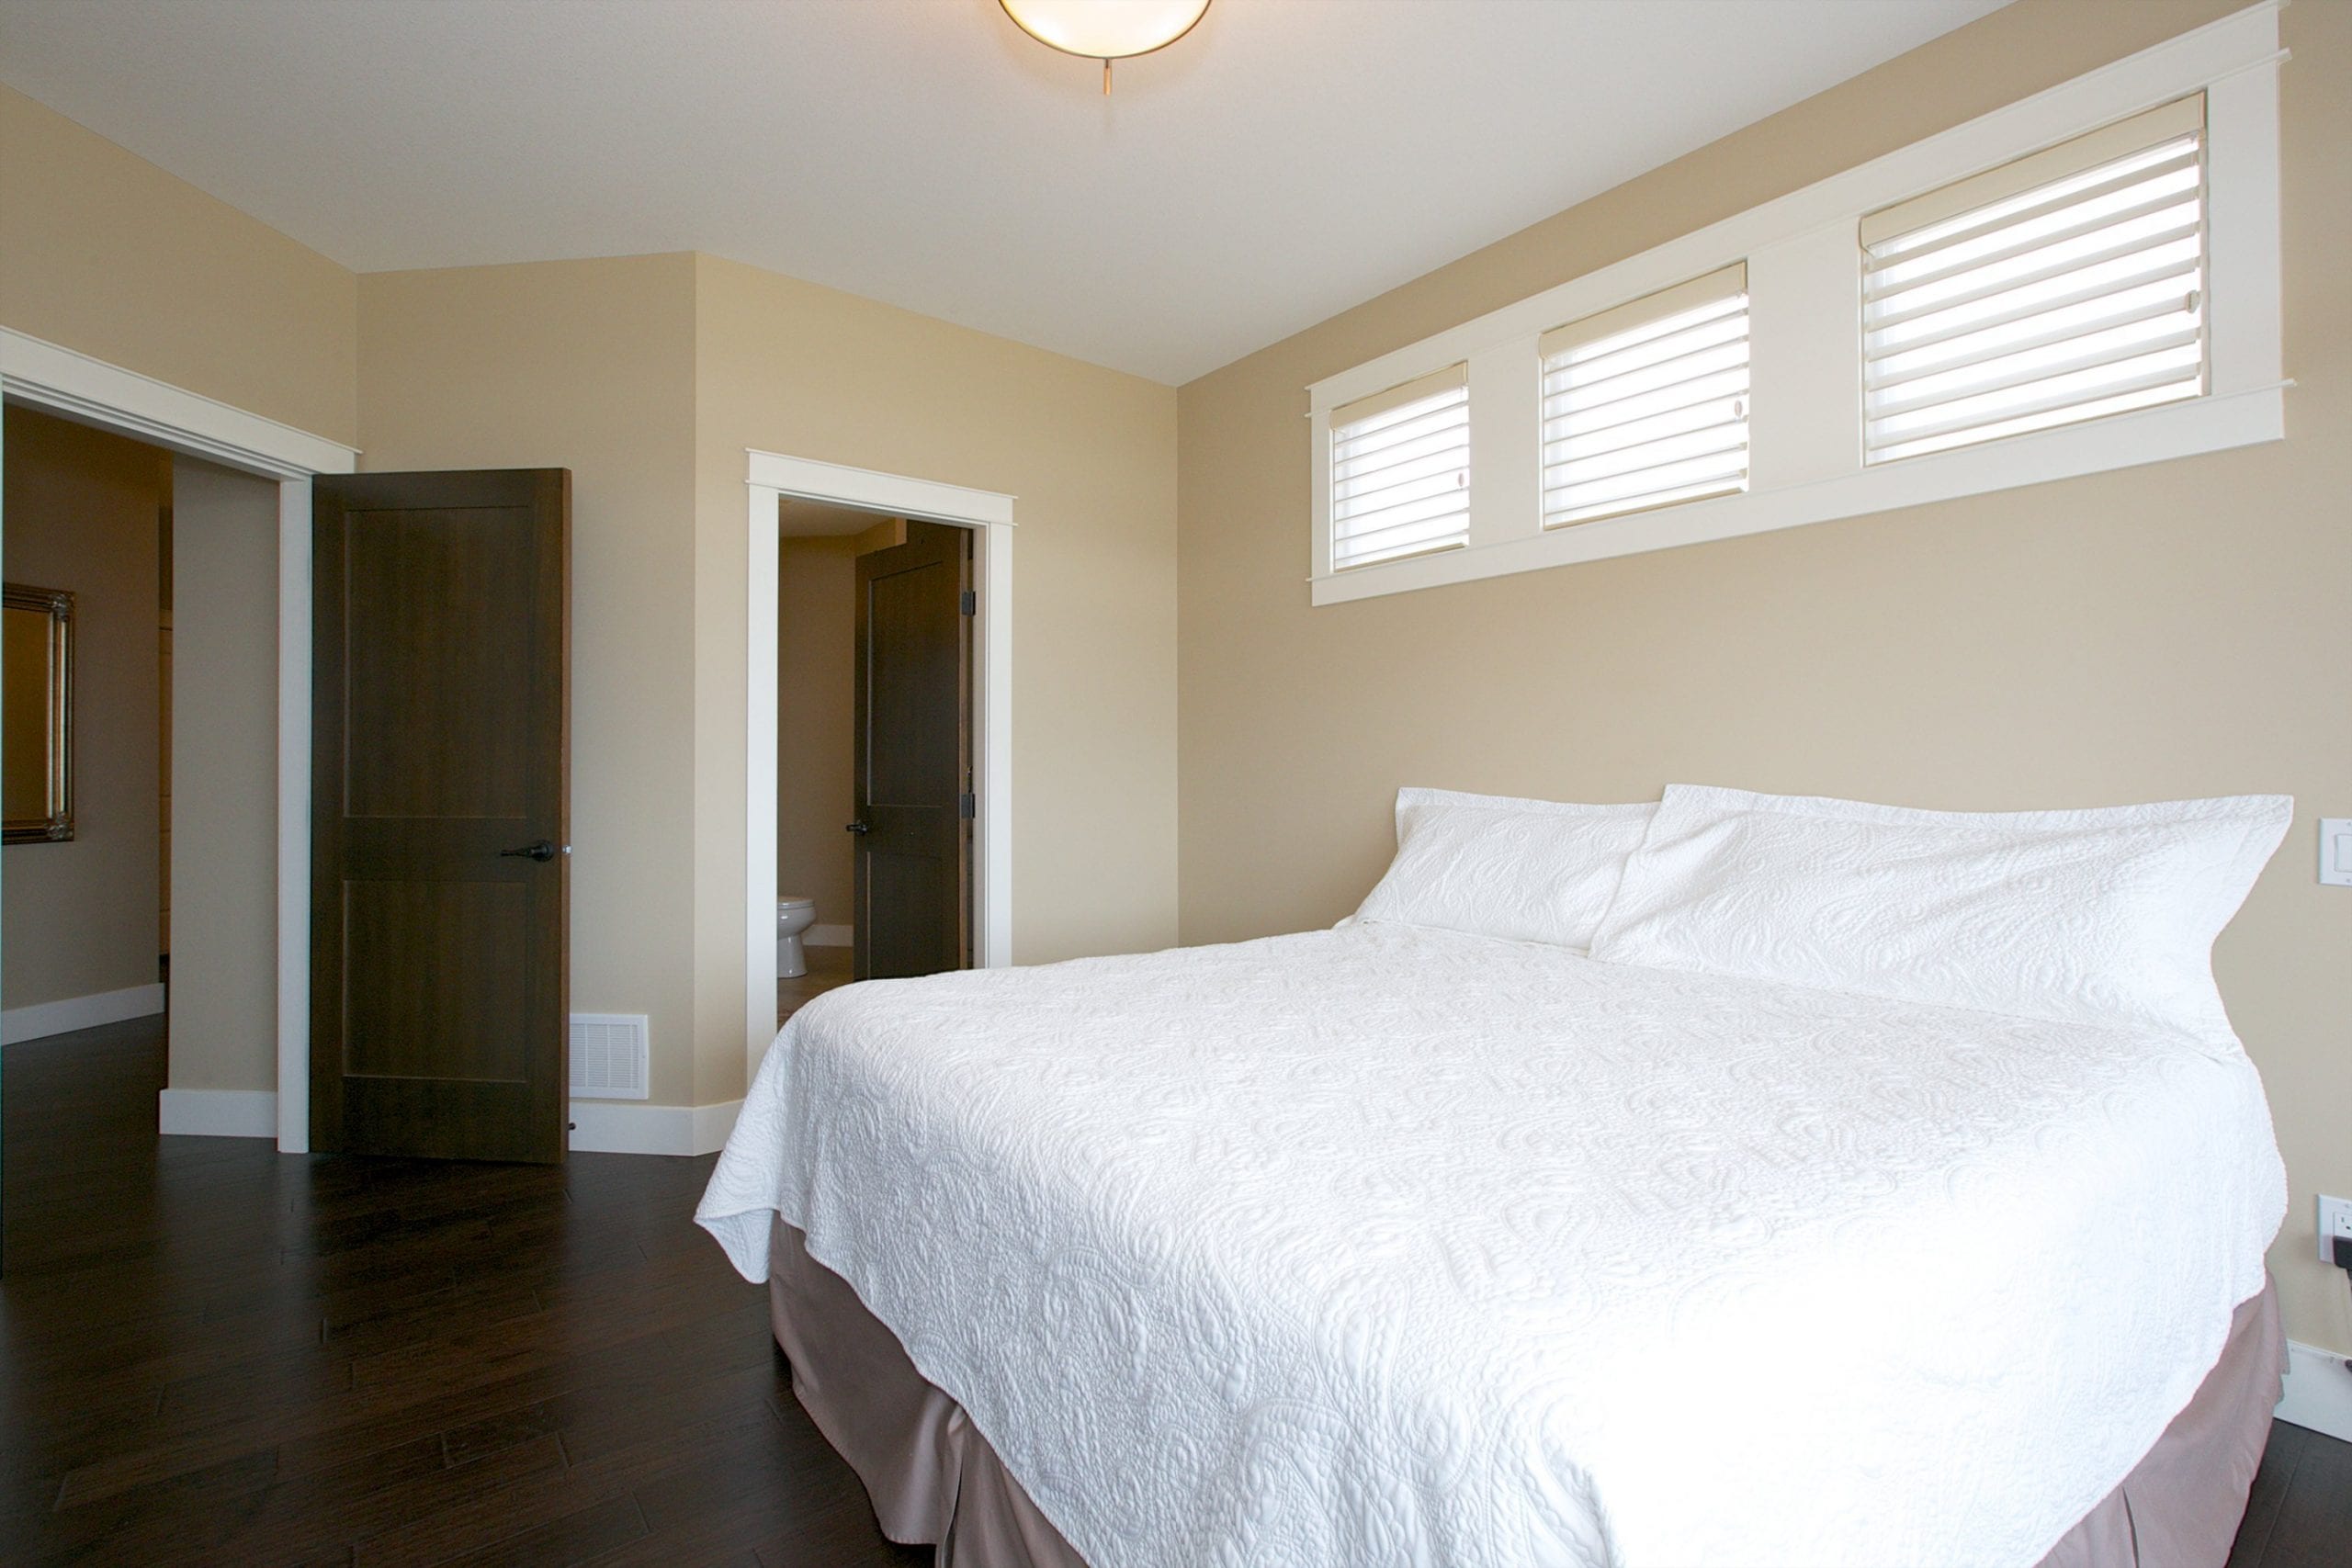 interior shot of west harbour home master bedroom with three windows directly above the bed and two doors in view